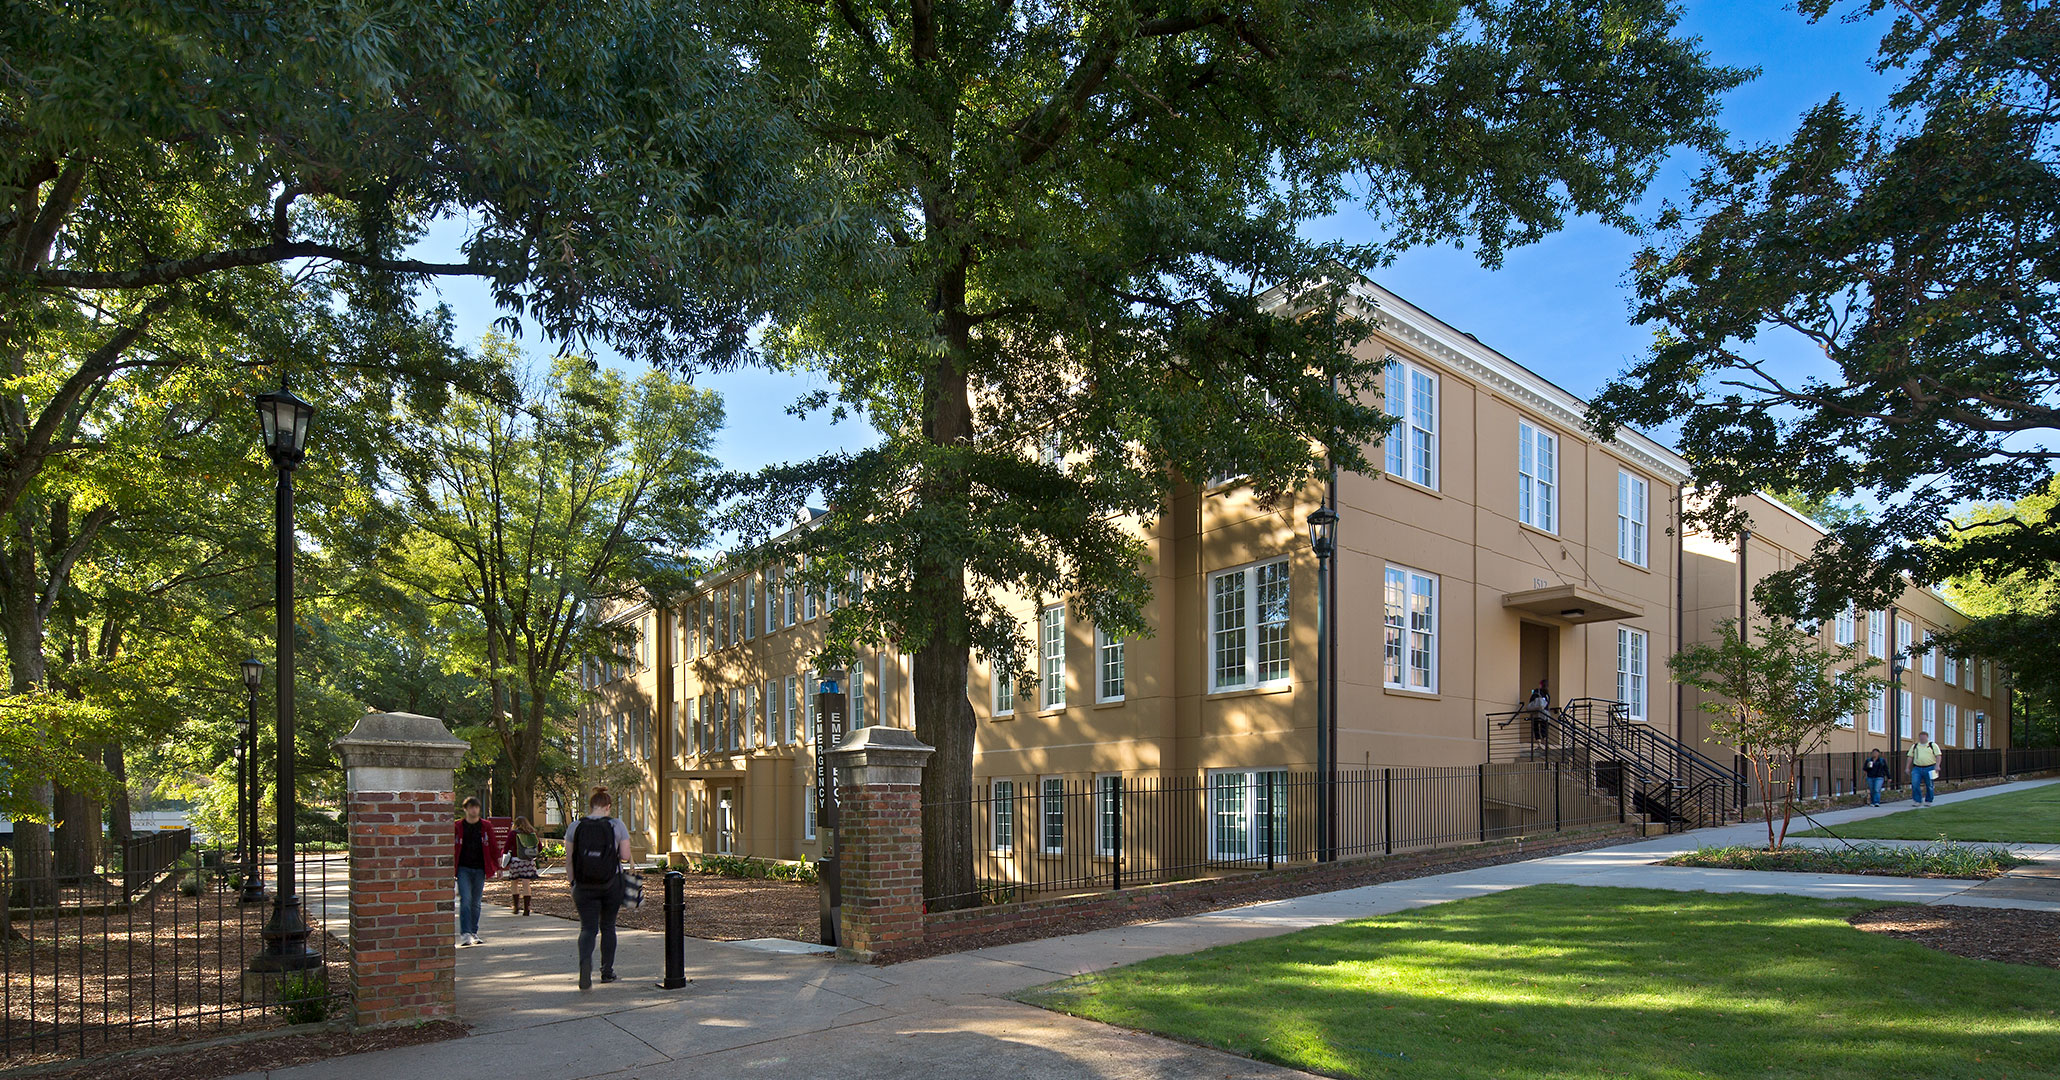 University of South Carolina worked with Boudreaux architects to rehabilitate historic campus building Hamilton College.